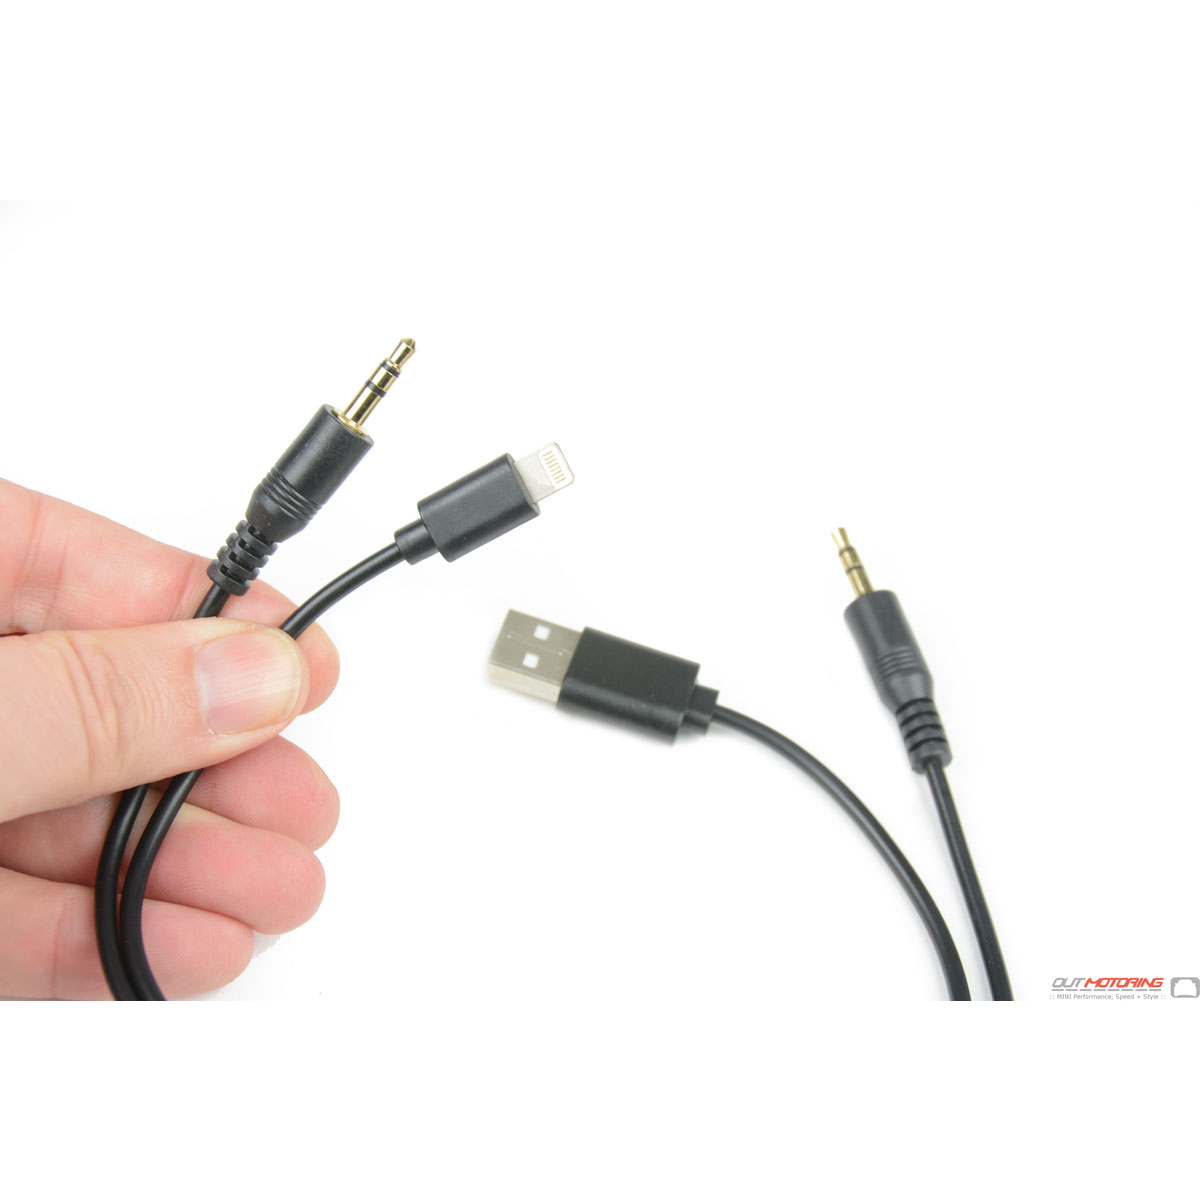 Cable Usb Lightning Blanc Synchronisation Ipad Mini Iphone 5 Ipod Touch 5g  Nano Yonis à Prix Carrefour